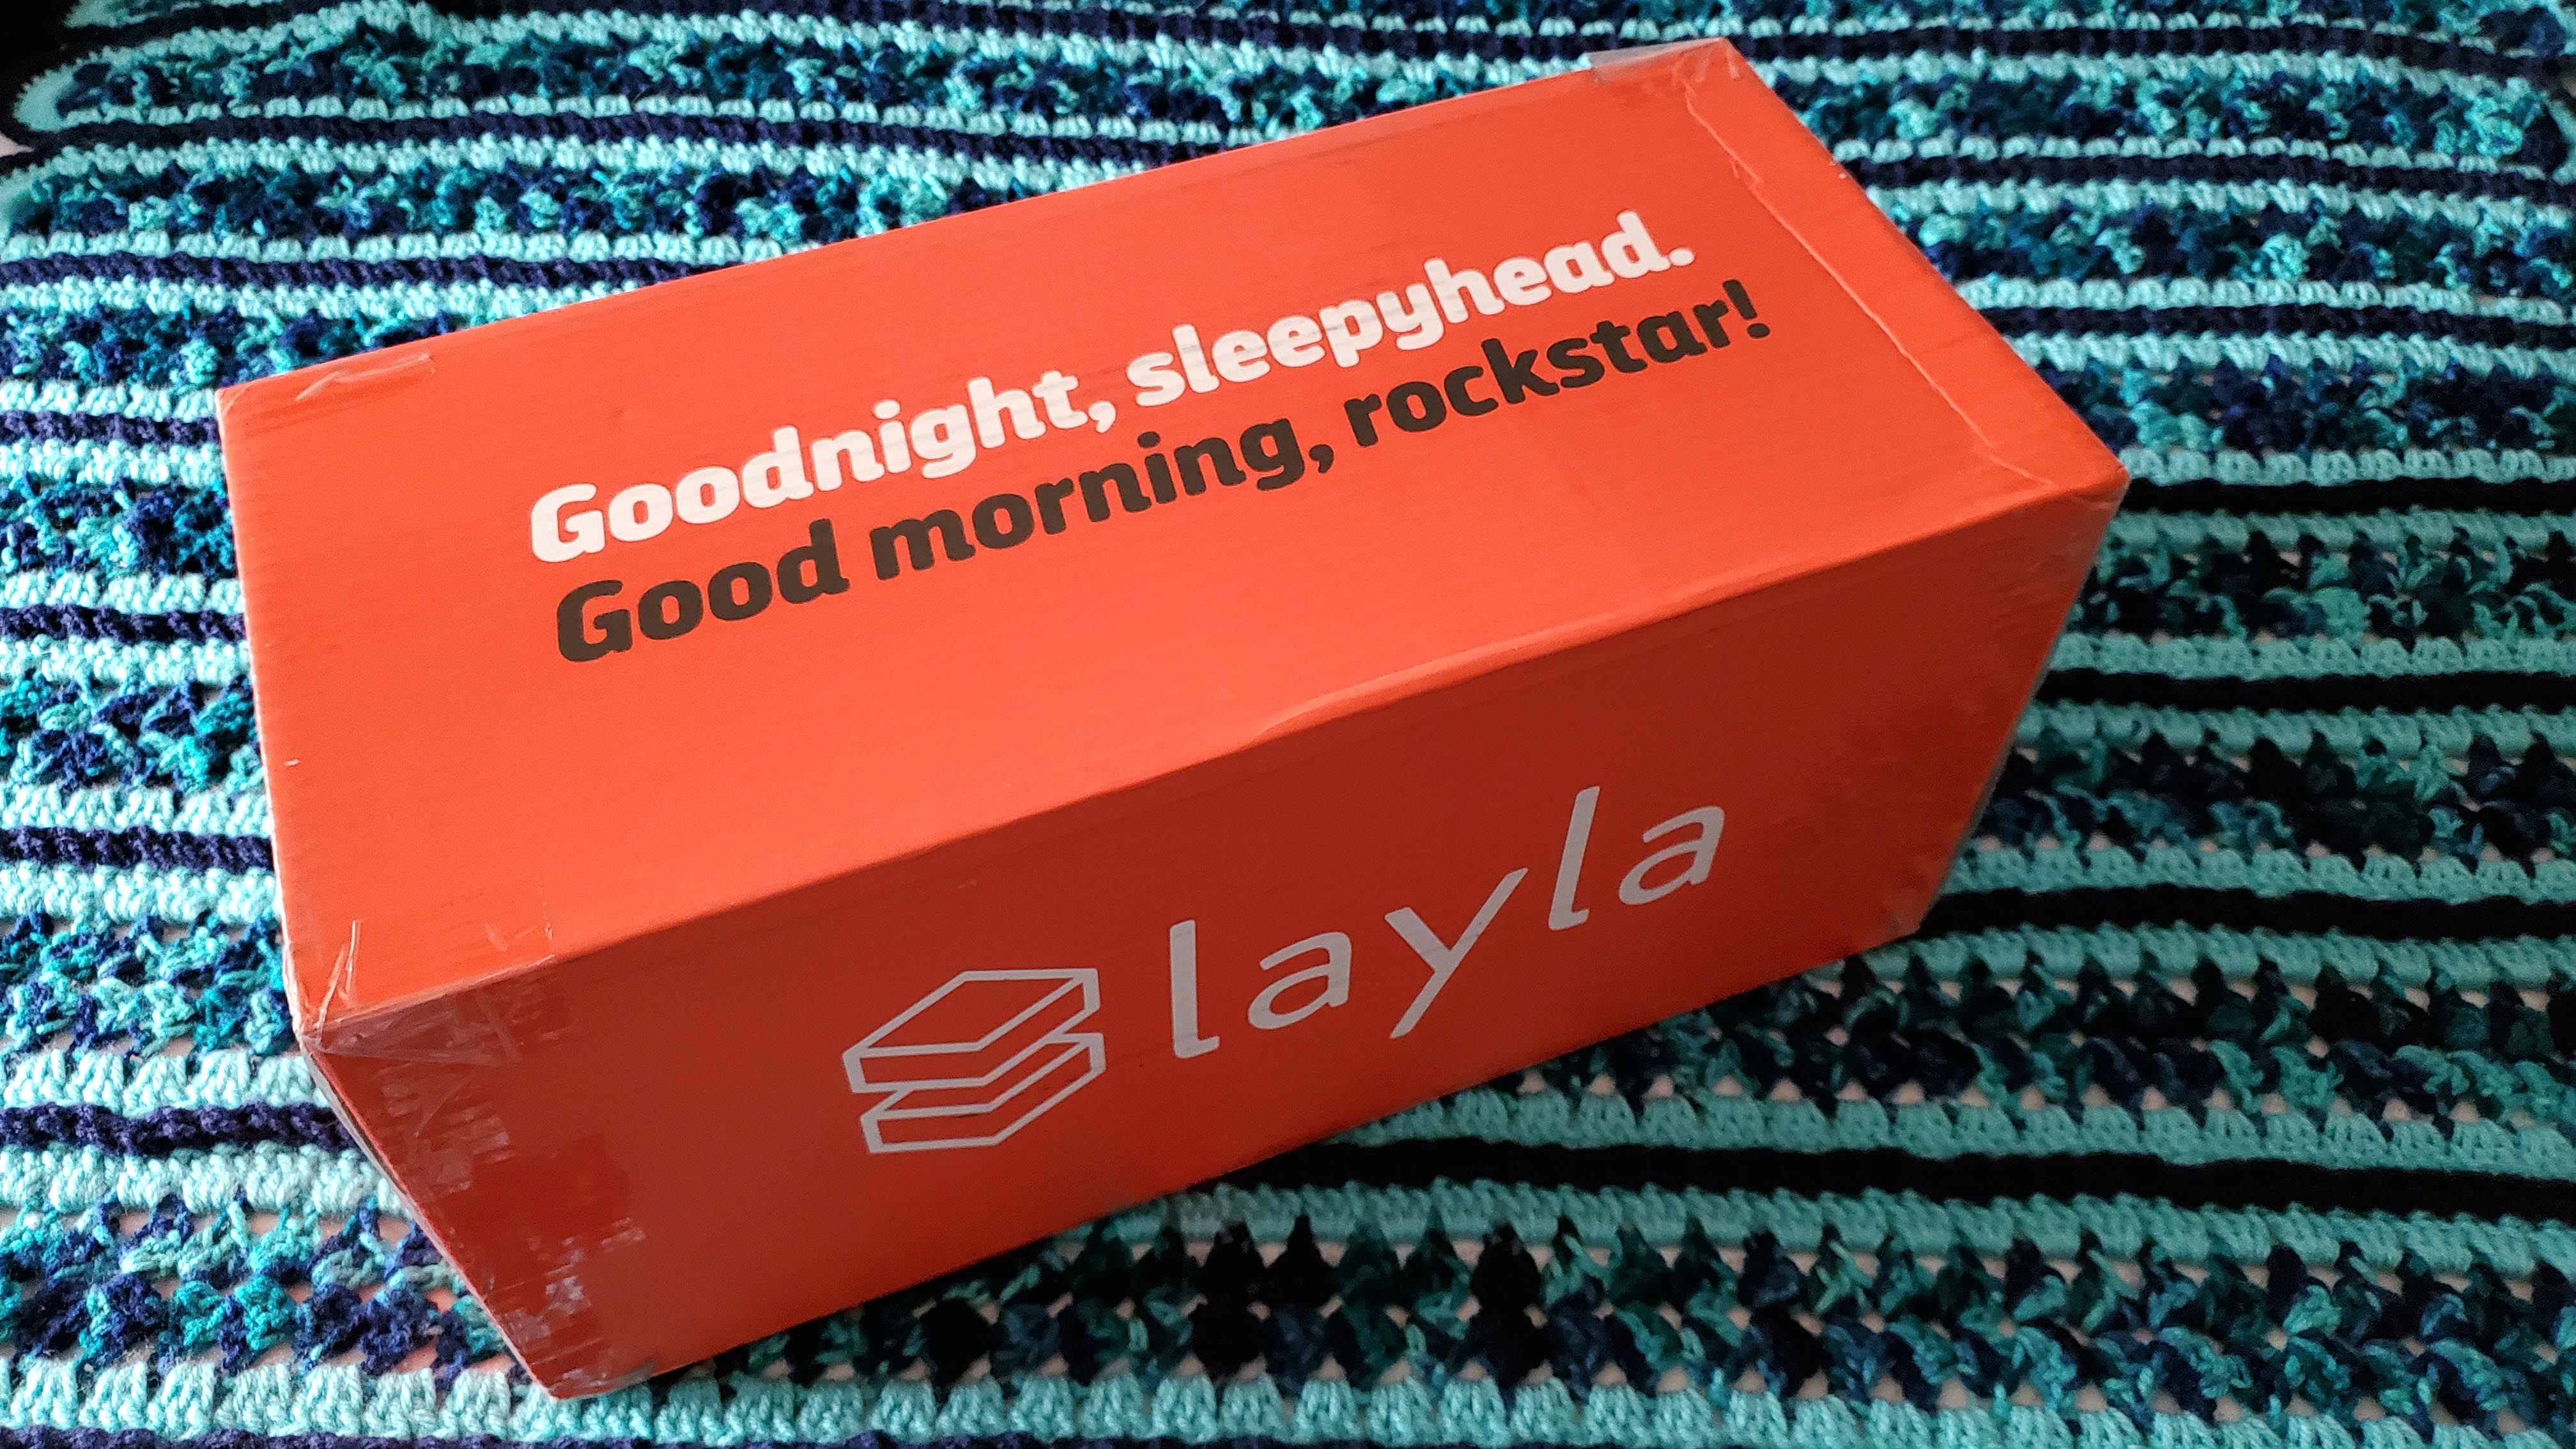 Layla Kapok Pillow in its red box